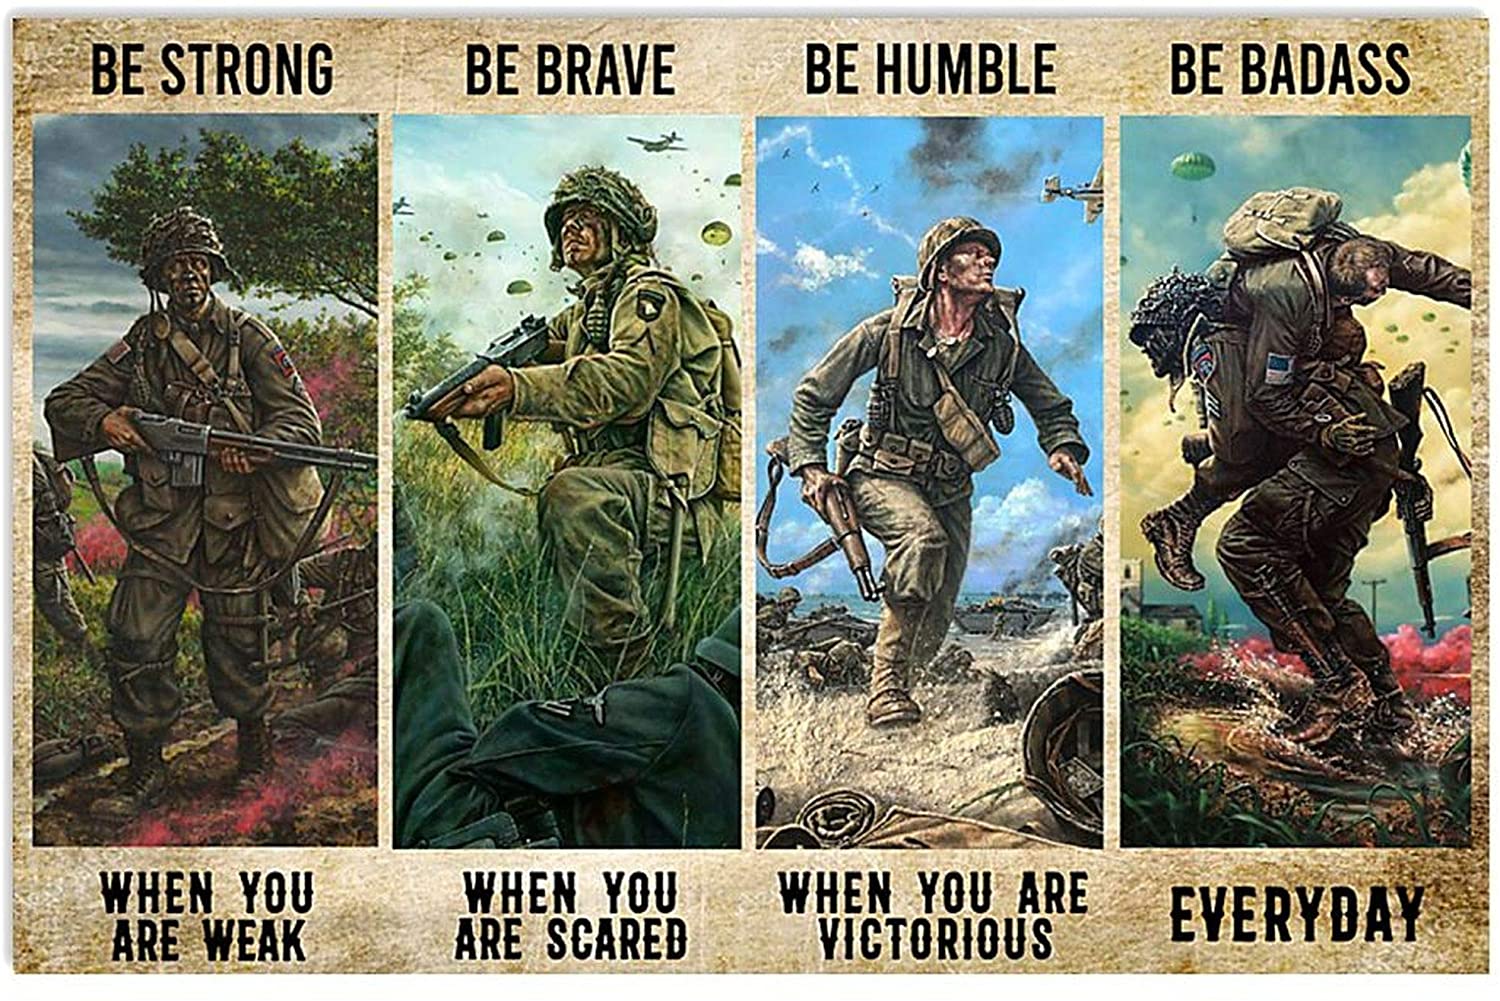 ANDIEZ Be Strong When You are Weak Be Brave When You are Scared Be Humble When You are Victorious Be Badass Everyday Veteran Poster